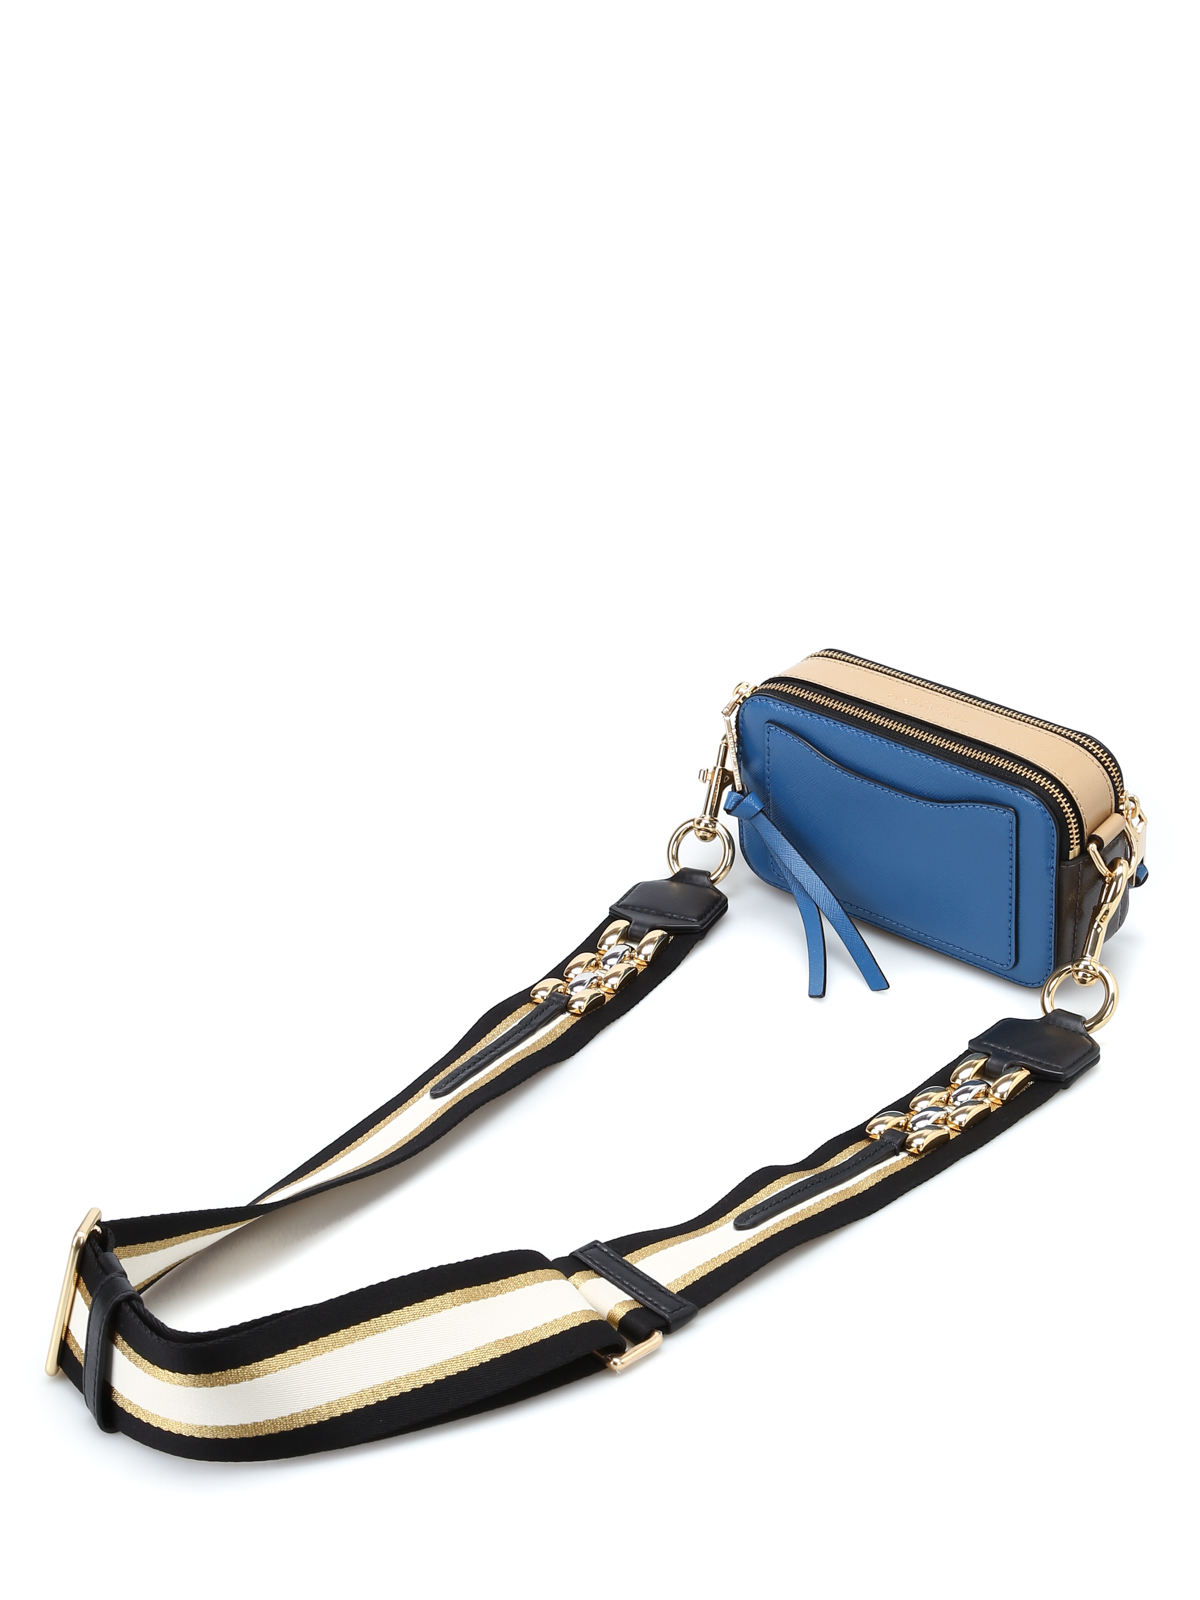 Marc Jacobs The Snapshot Small Crossbody Bag - Red, Blue And White